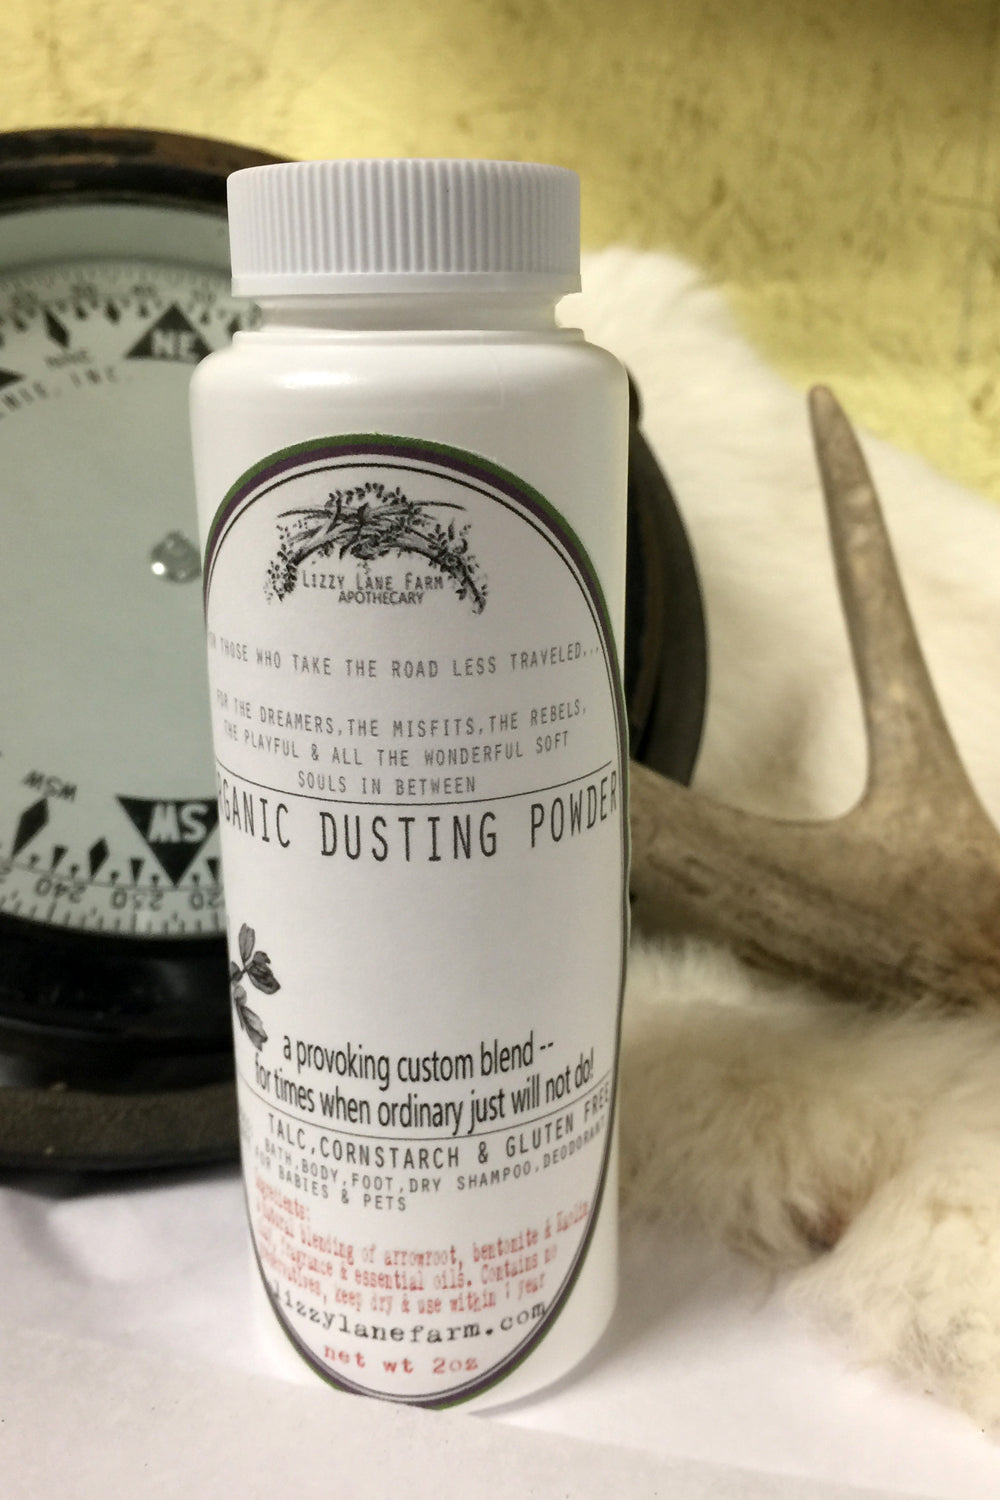 Organic Dusting Body Powder Shakers: Talc, Cornstarch & GMO free: PICK • YOUR • SCENT :: Herbal Blends - Lizzy Lane Farm Apothecary